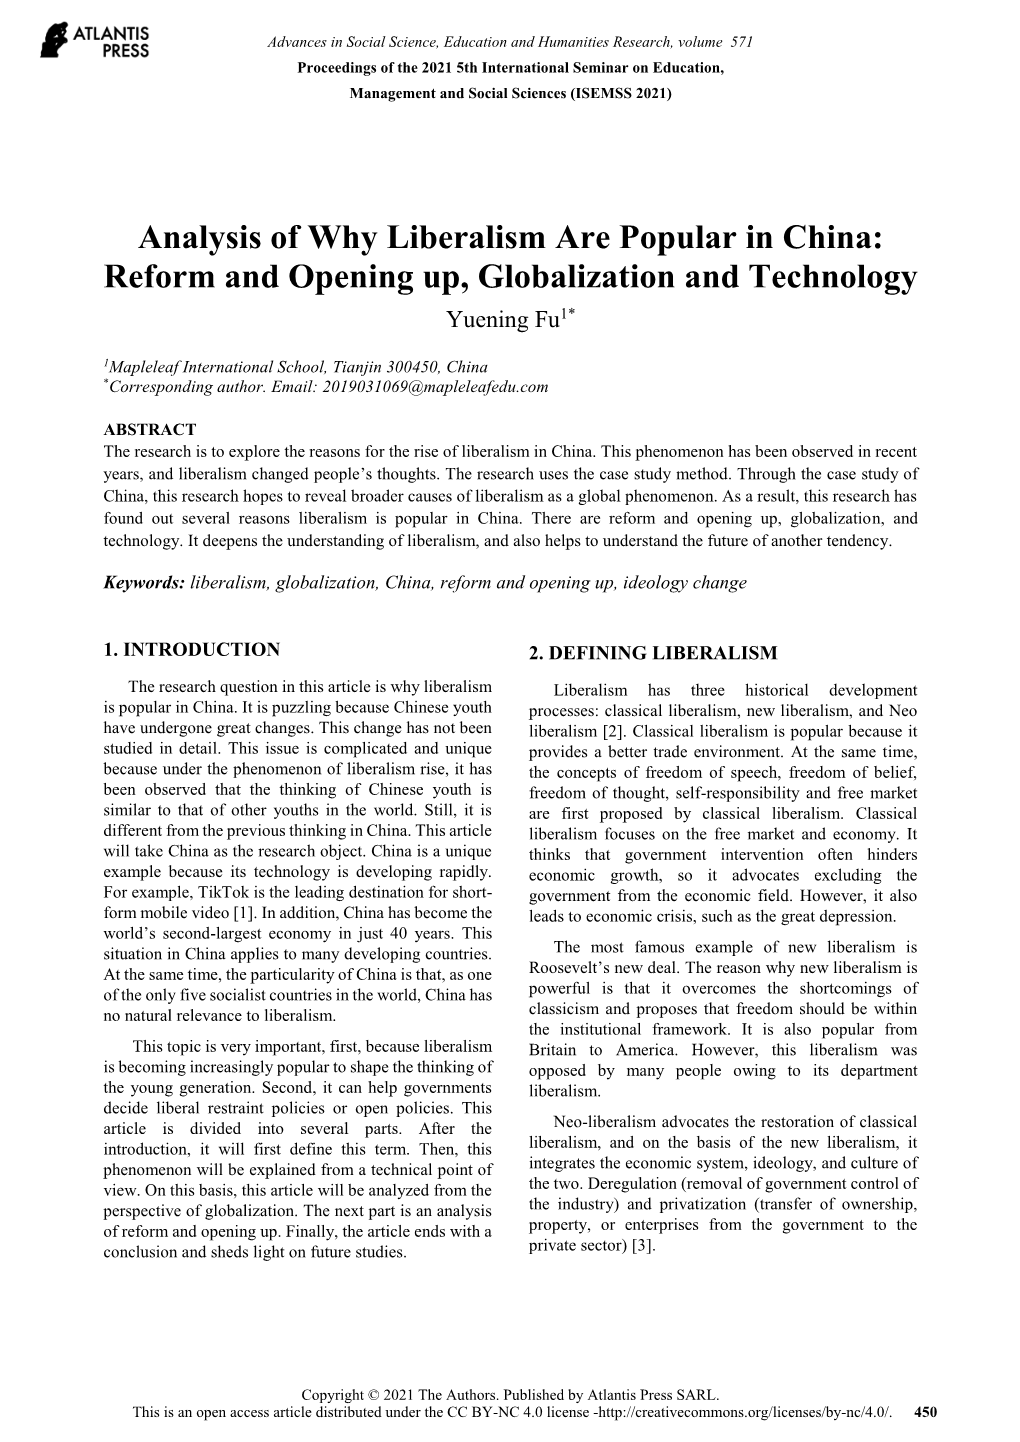 Analysis of Why Liberalism Are Popular in China: Reform and Opening Up, Globalization and Technology Yuening Fu1*